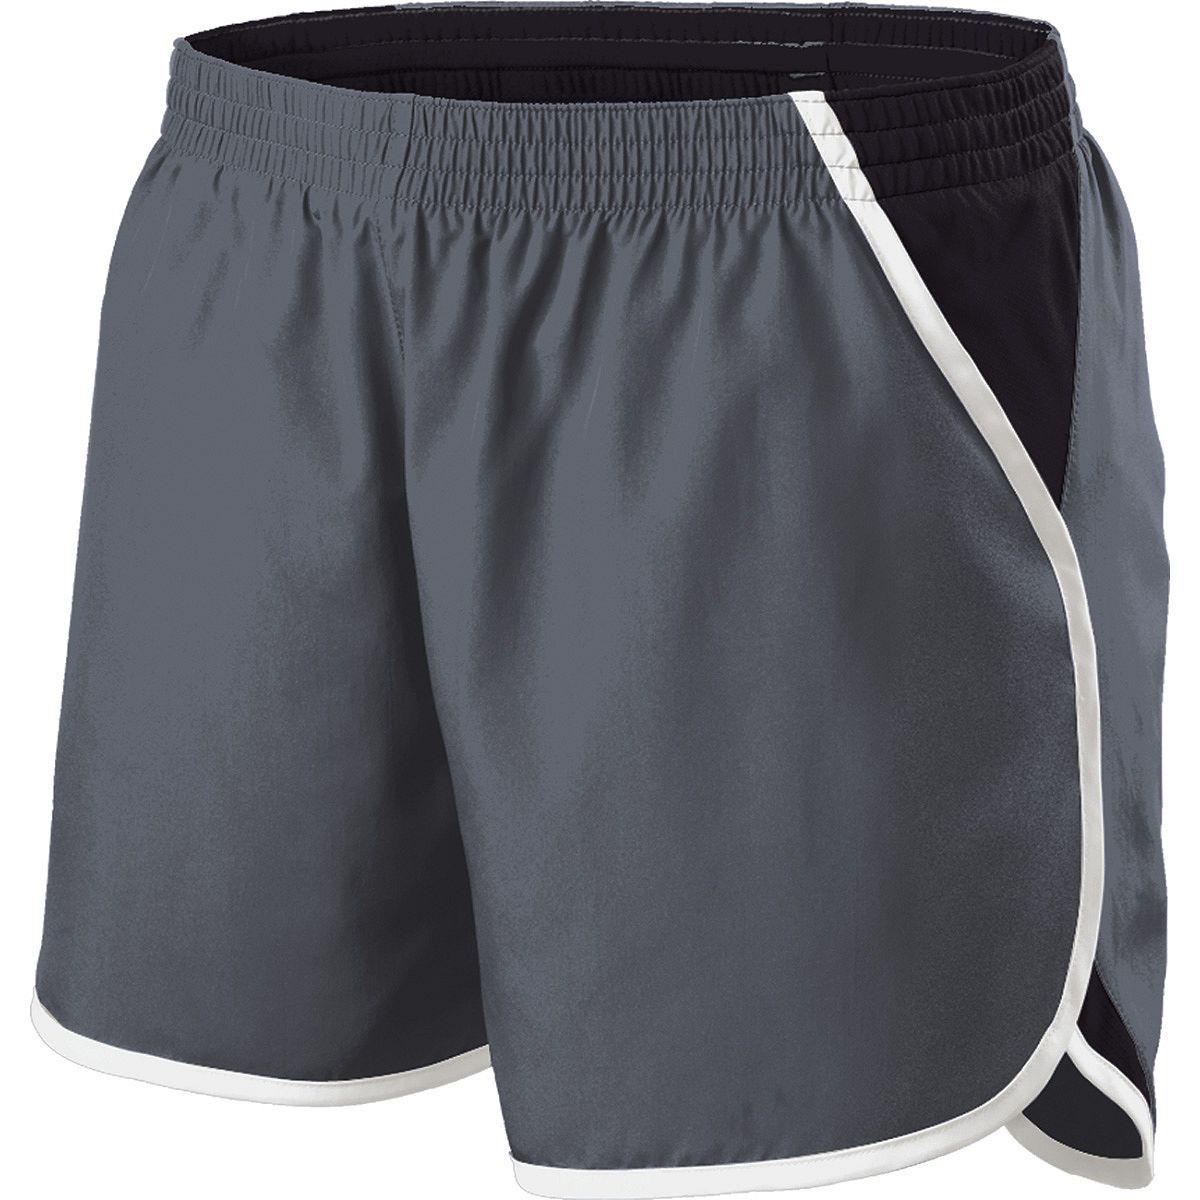 Holloway Girls Energize Shorts in Graphite/Black/White  -Part of the Girls, Holloway, Girls-Shorts product lines at KanaleyCreations.com